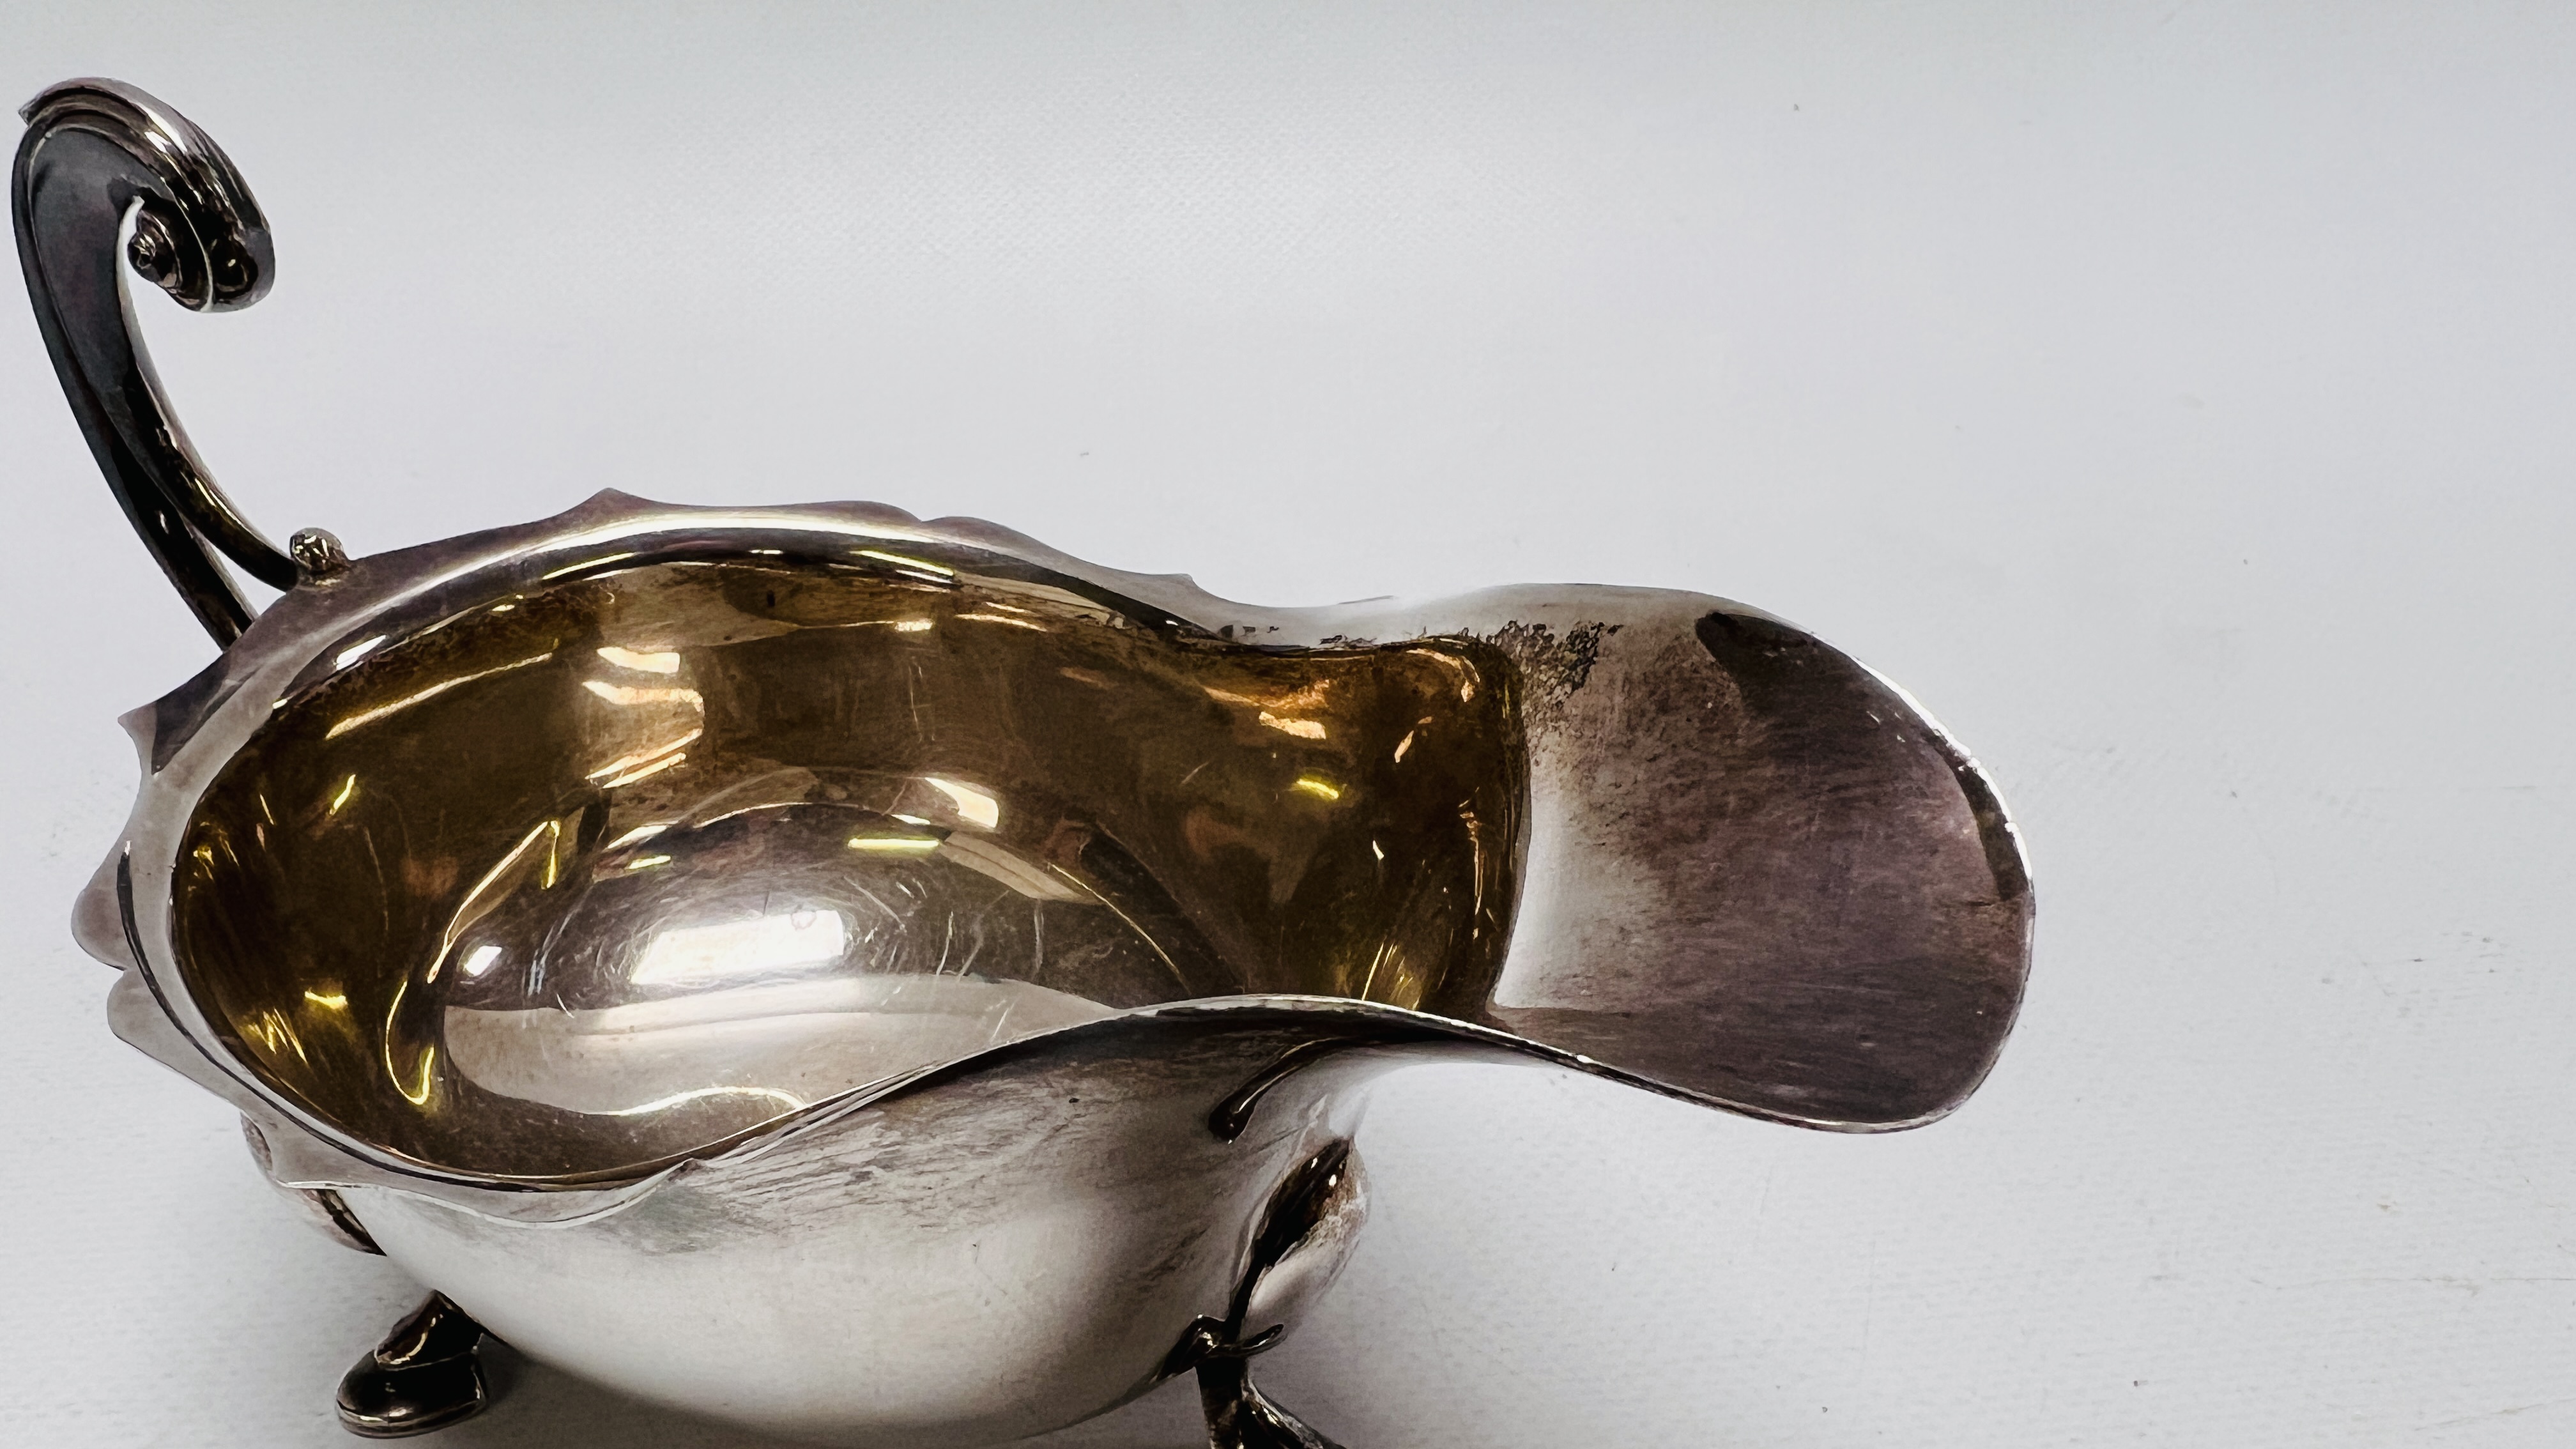 TWO SILVER SAUCE BOATS IN THE C18TH. - Image 8 of 12